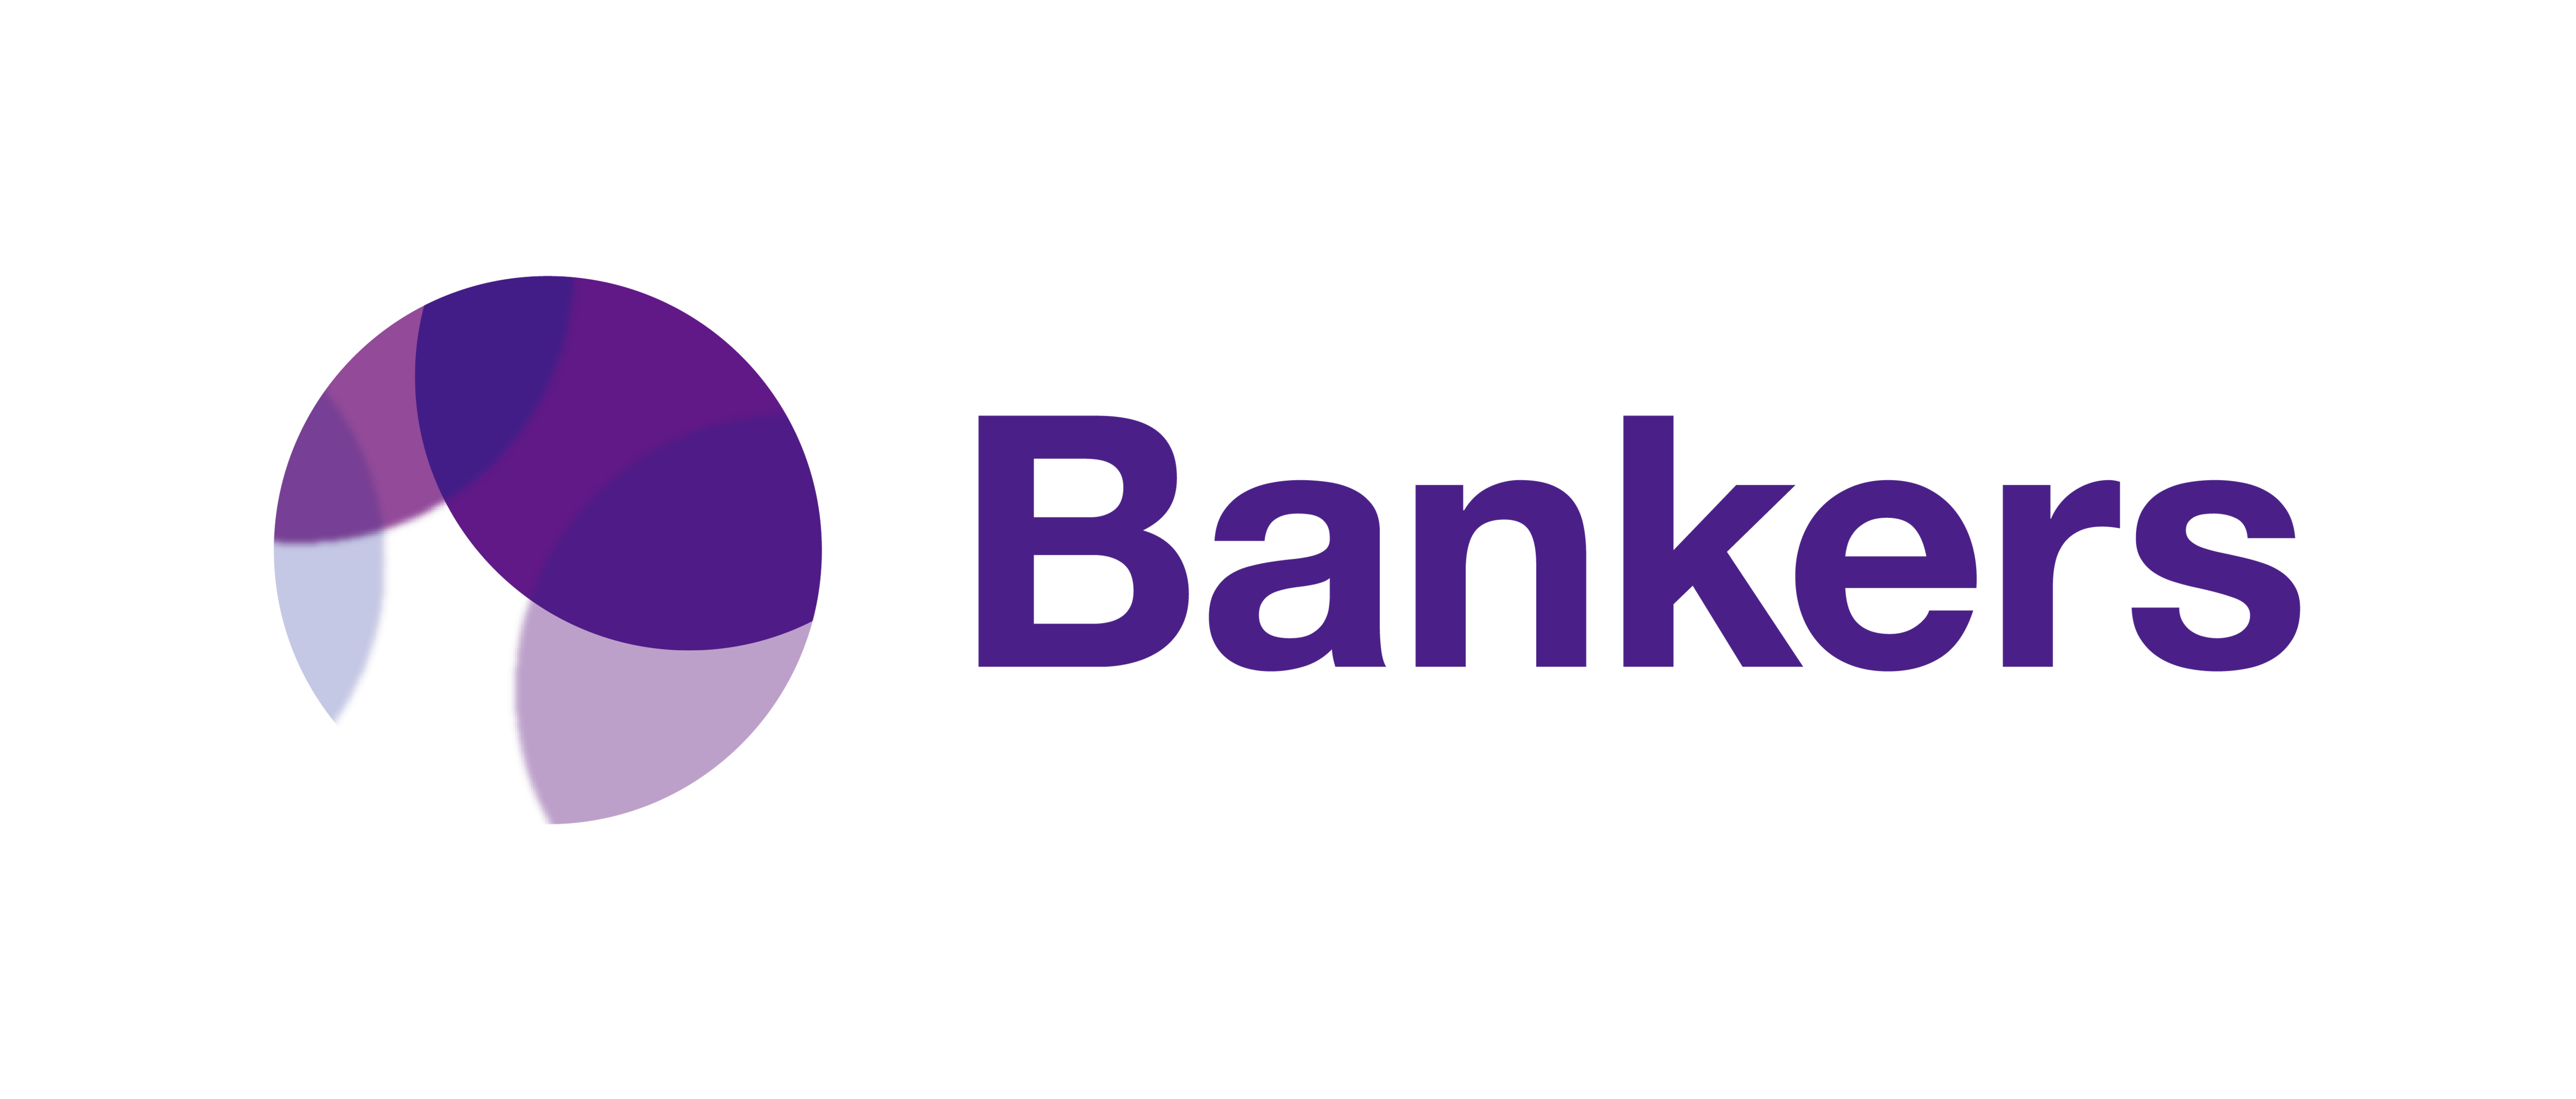 Bankkers